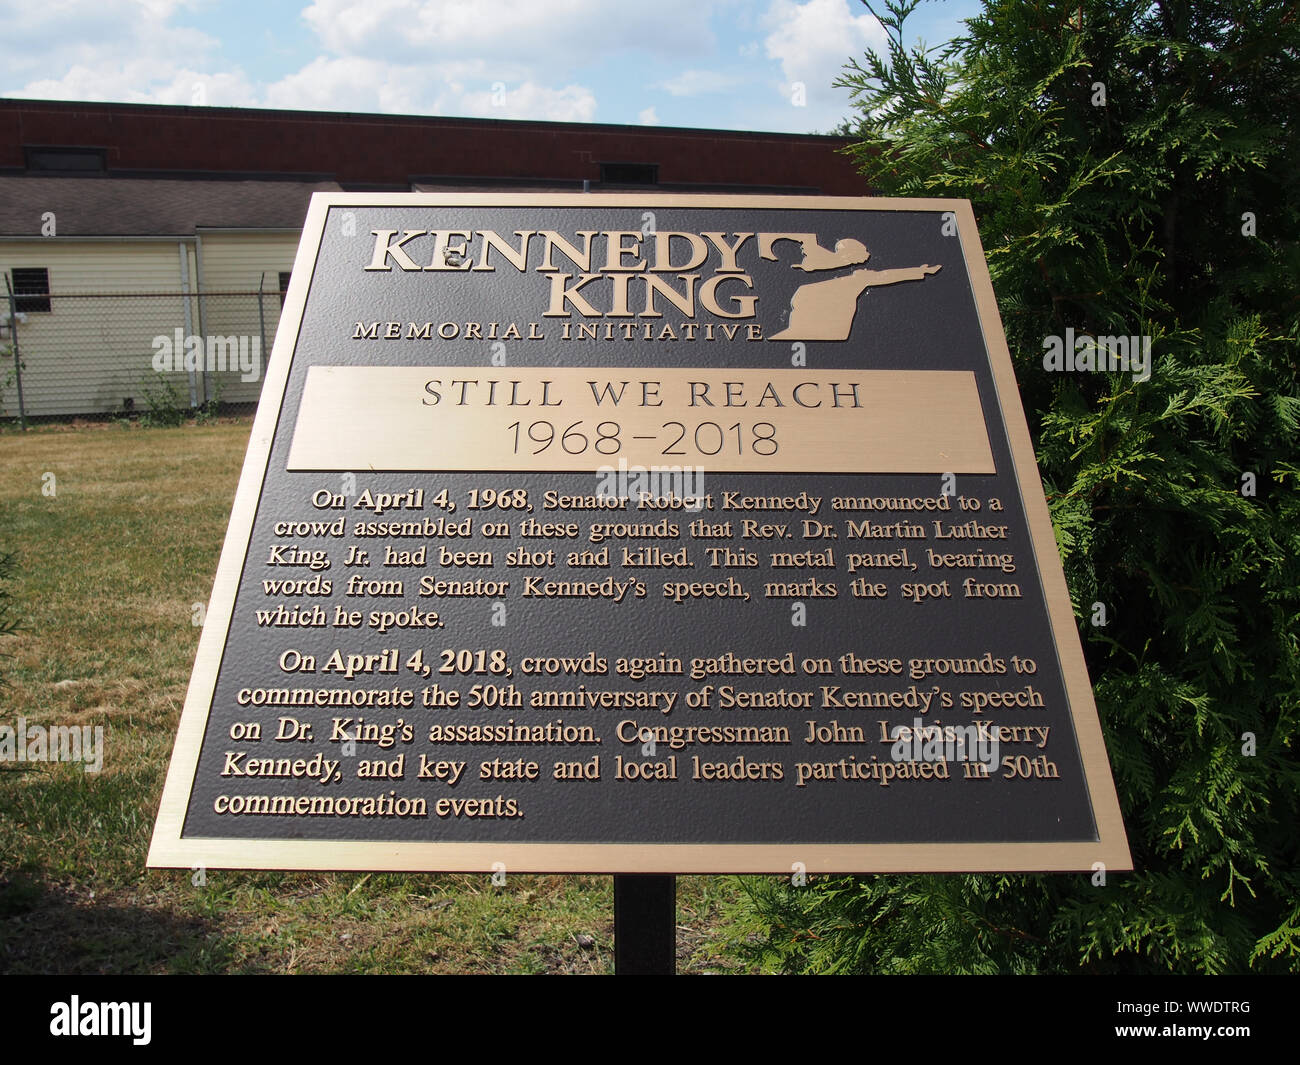 Placard marking the spot where Robert F. Kennedy stood as he made his April 6, 1968 following Dr. Martin Luther King, Jr.'s assassination, Indianapoli Stock Photo